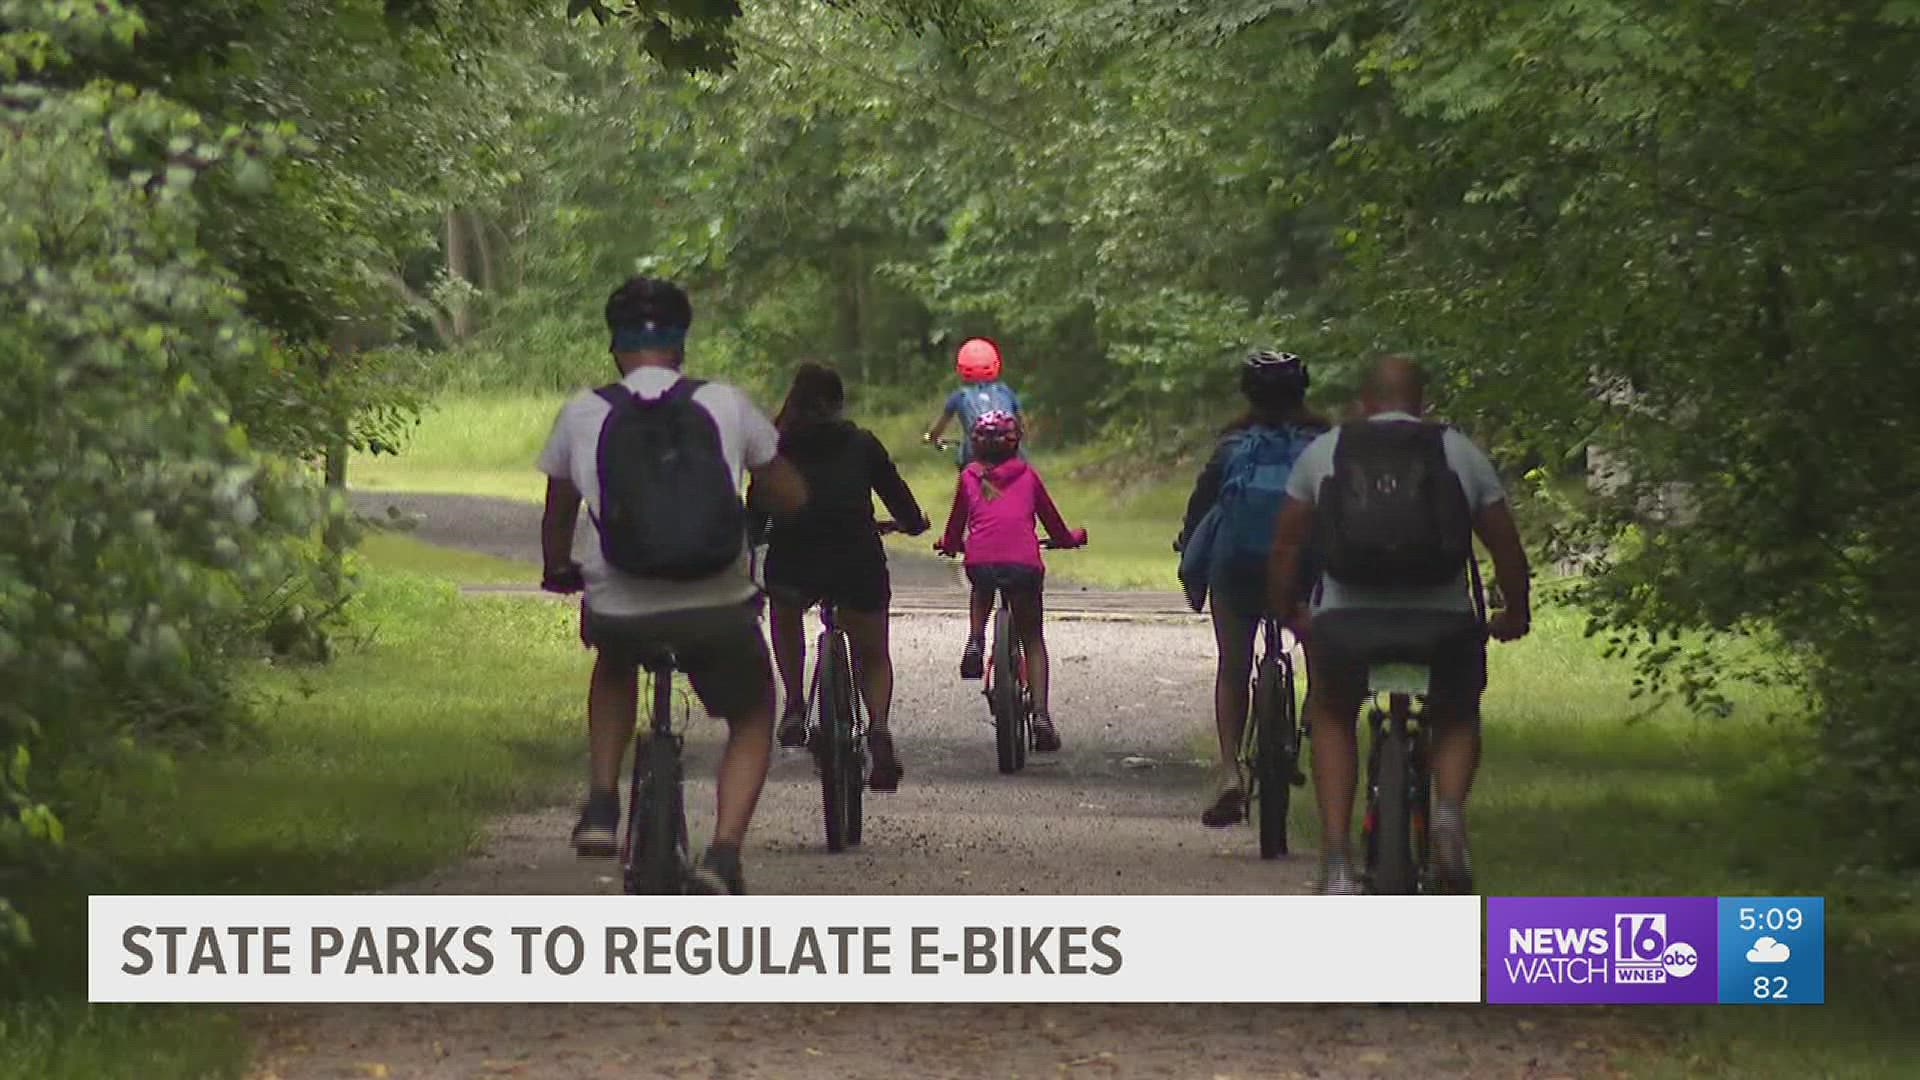 With bike sales booming, many are now hopping on the trend of electric bicycles, but state officials are pumping the brakes on e-bikes on popular trails.